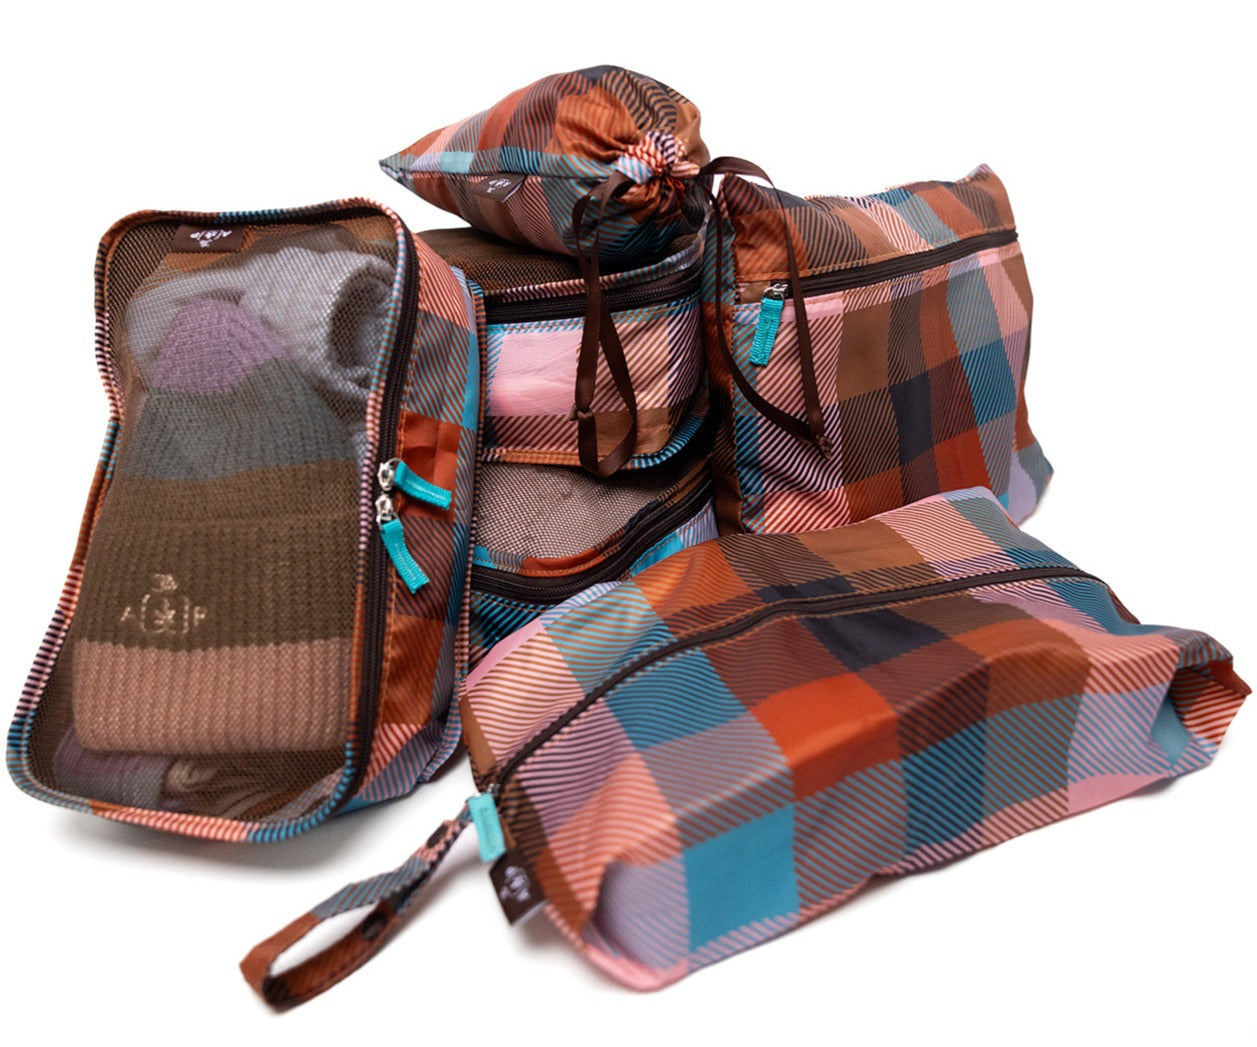 Retro Plaid Camping Style Packing Cubes & Travel Organizer